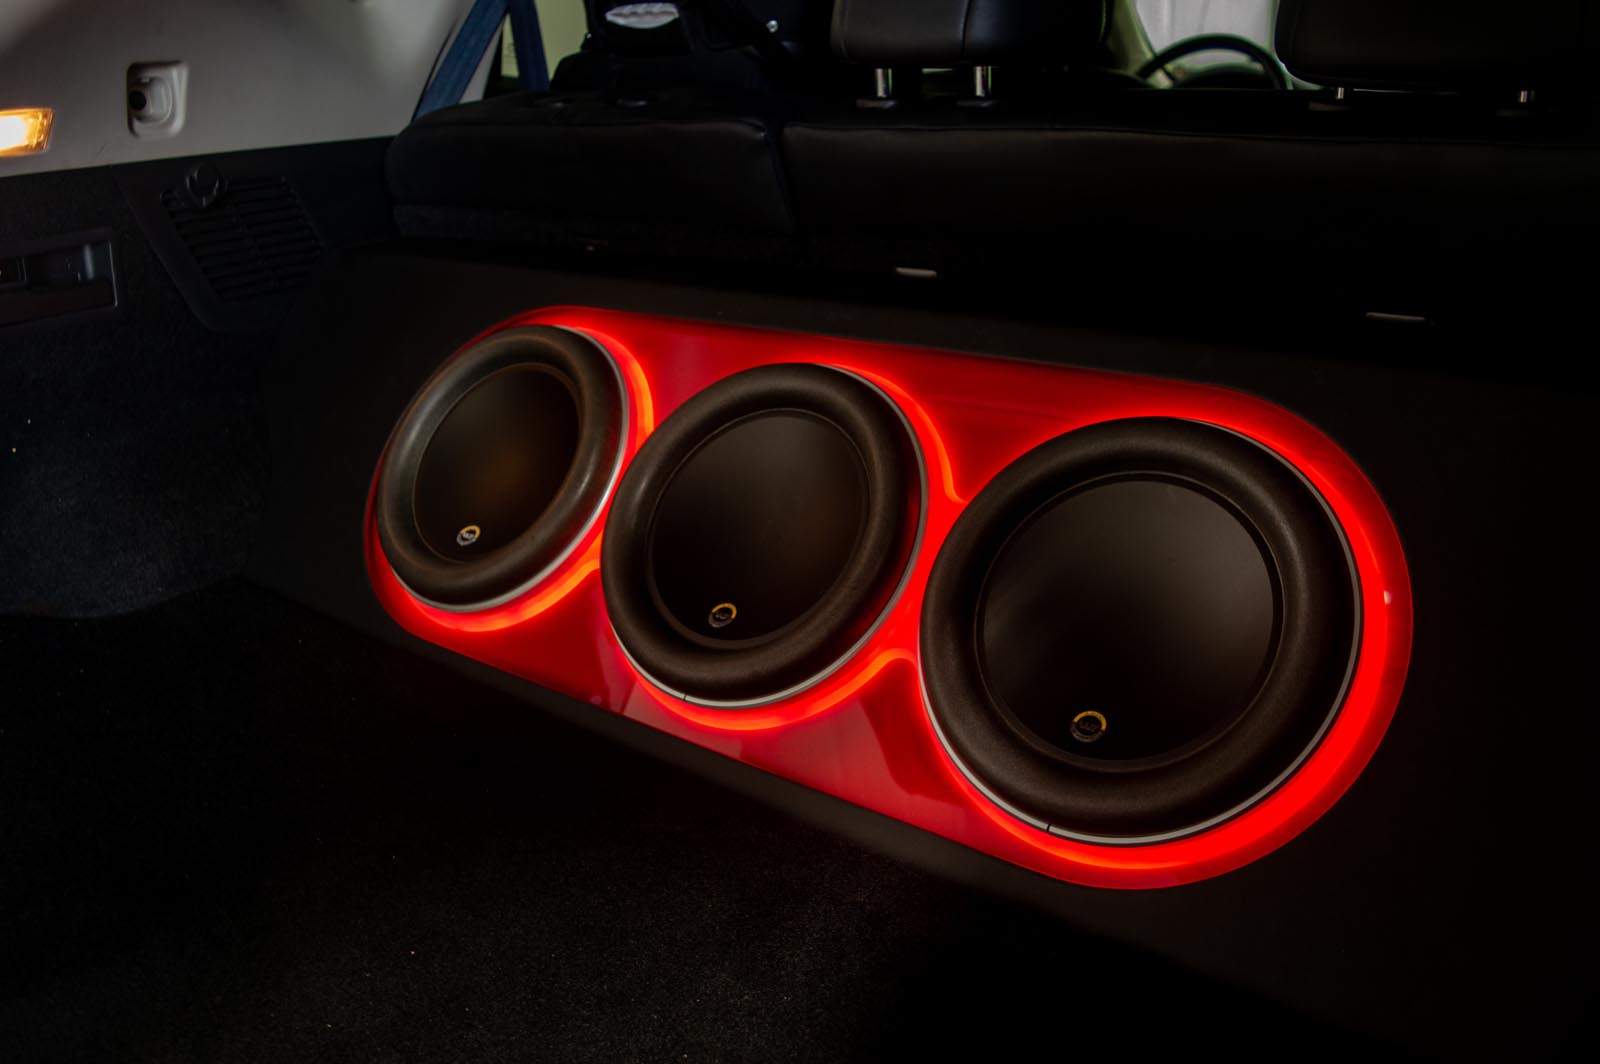 2015 Nissan Murano Car Stereo System by Explicit Customs in Melbourne FL Focal and JL Audio